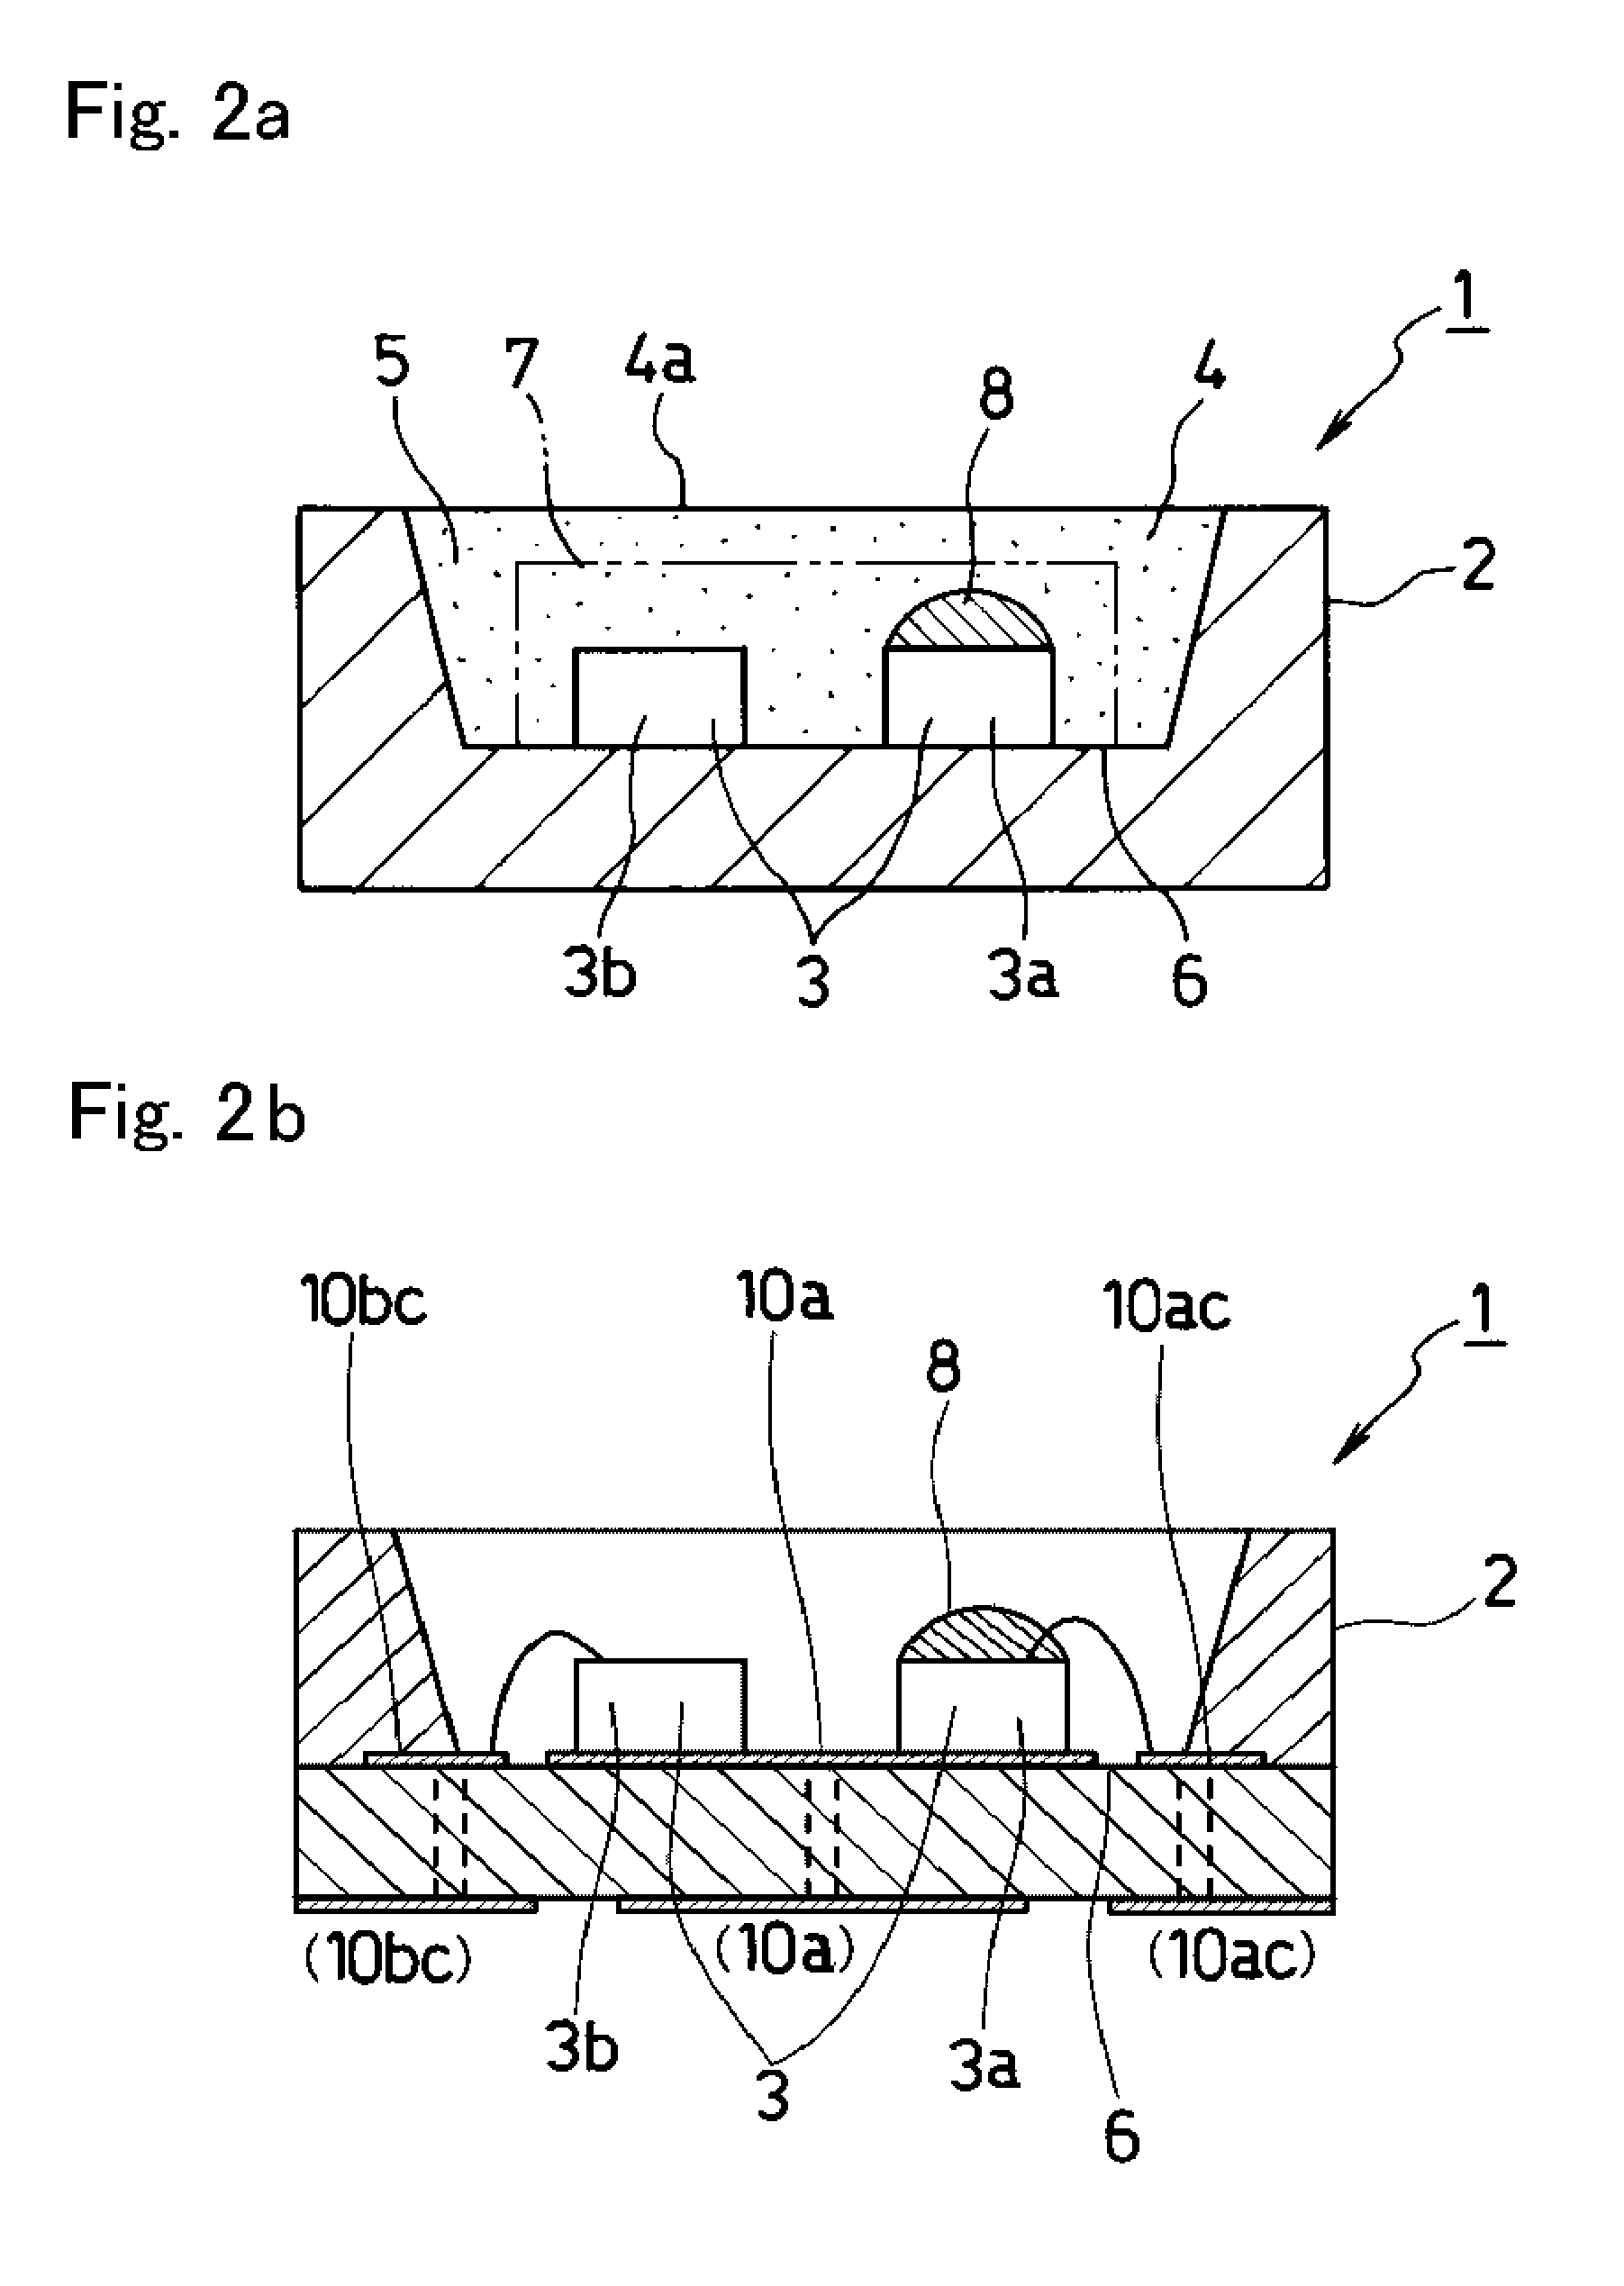 LED device and LED lighting apparatus